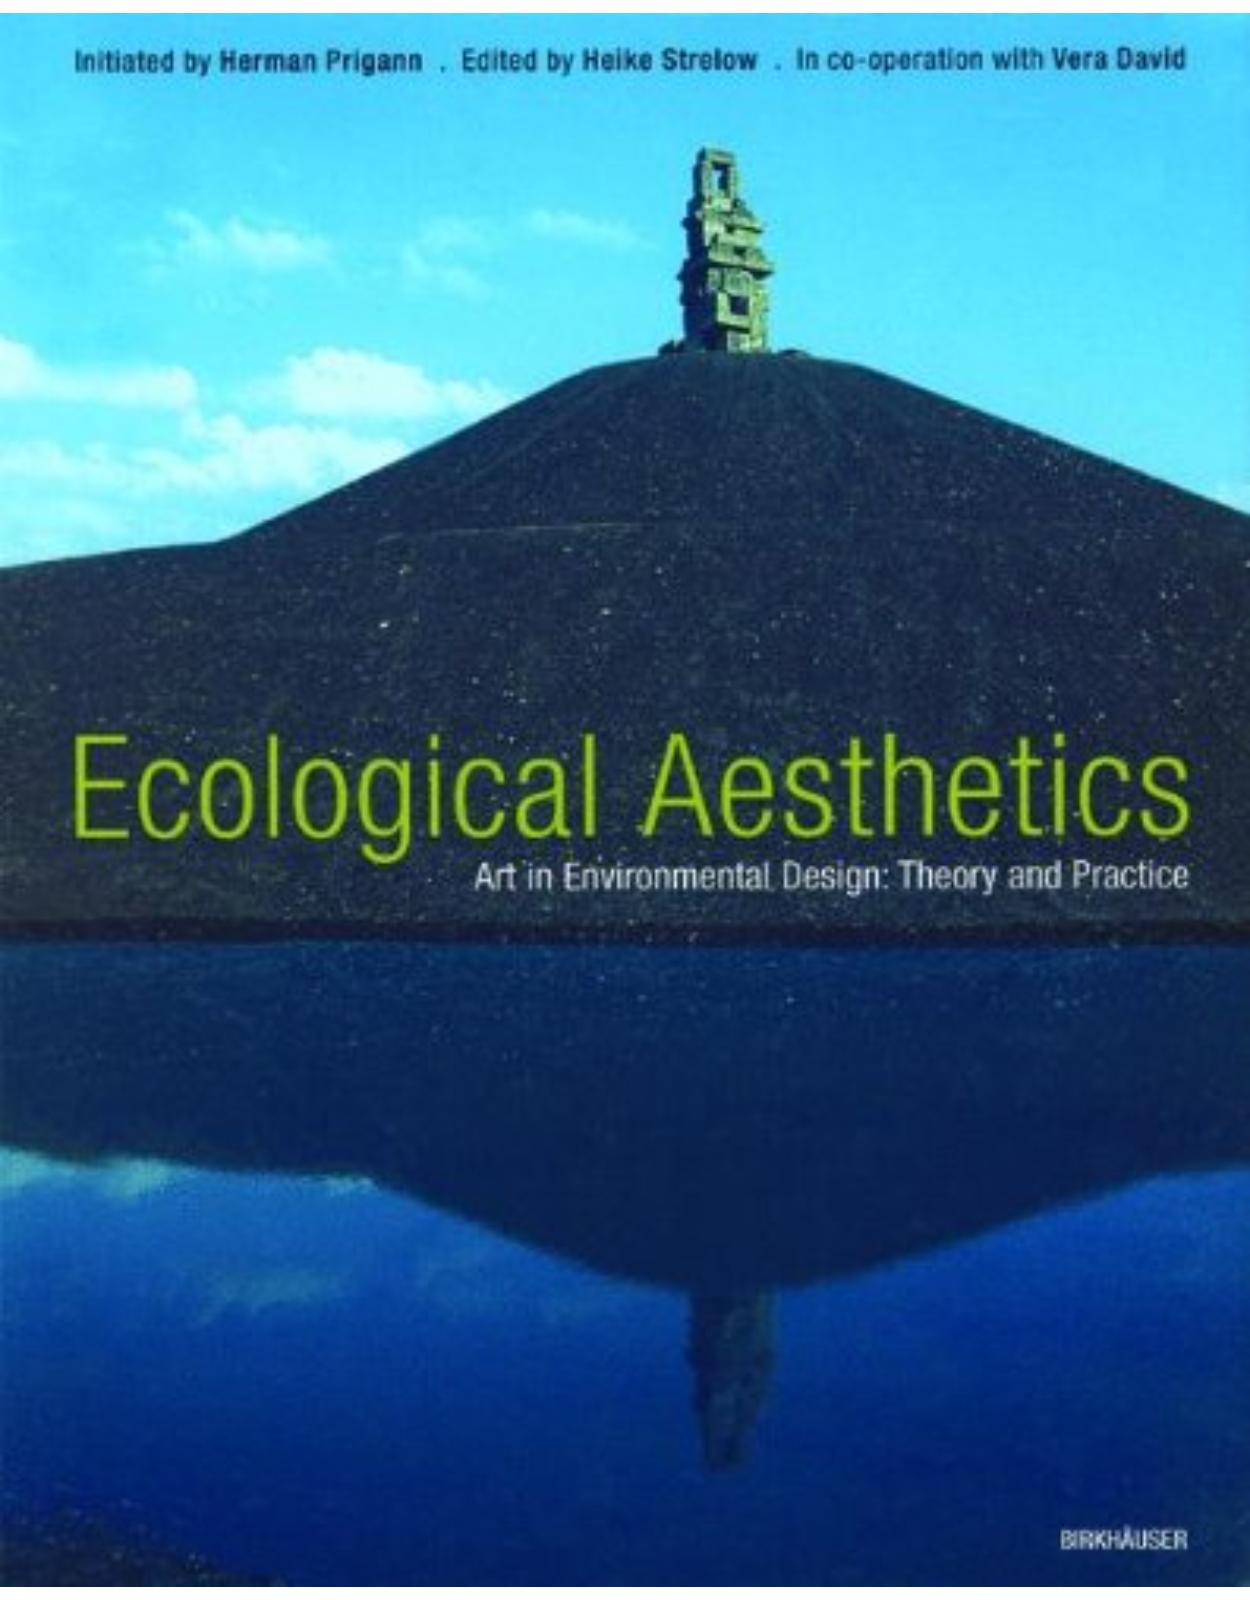 Ecological Aesthetics: Art in Environmental Design - Theory and Practi